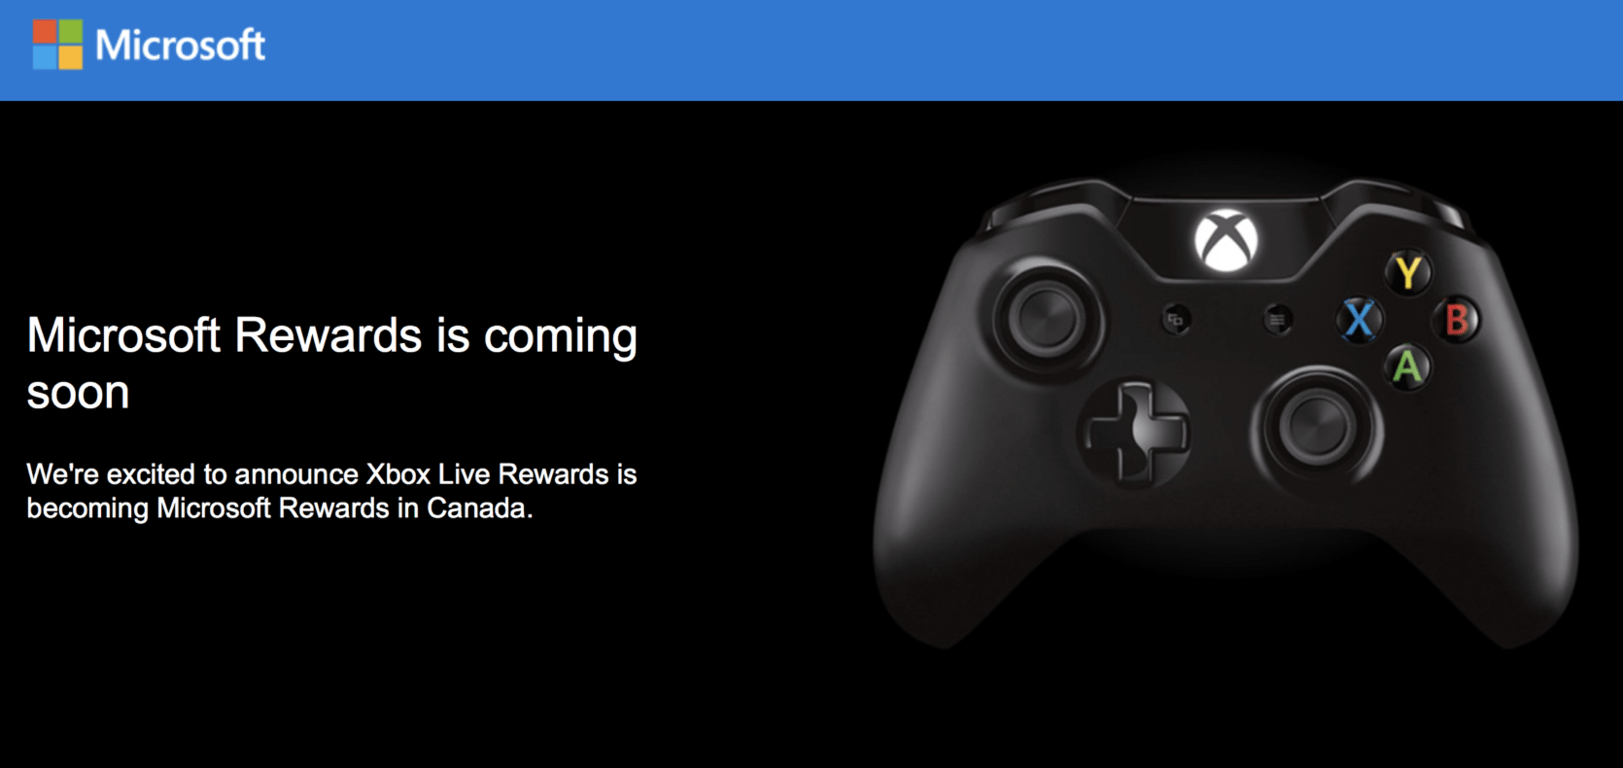 Microsoft reveals more on move from Xbox Live Rewards to Microsoft Rewards in Canada - OnMSFT.com - September 11, 2017